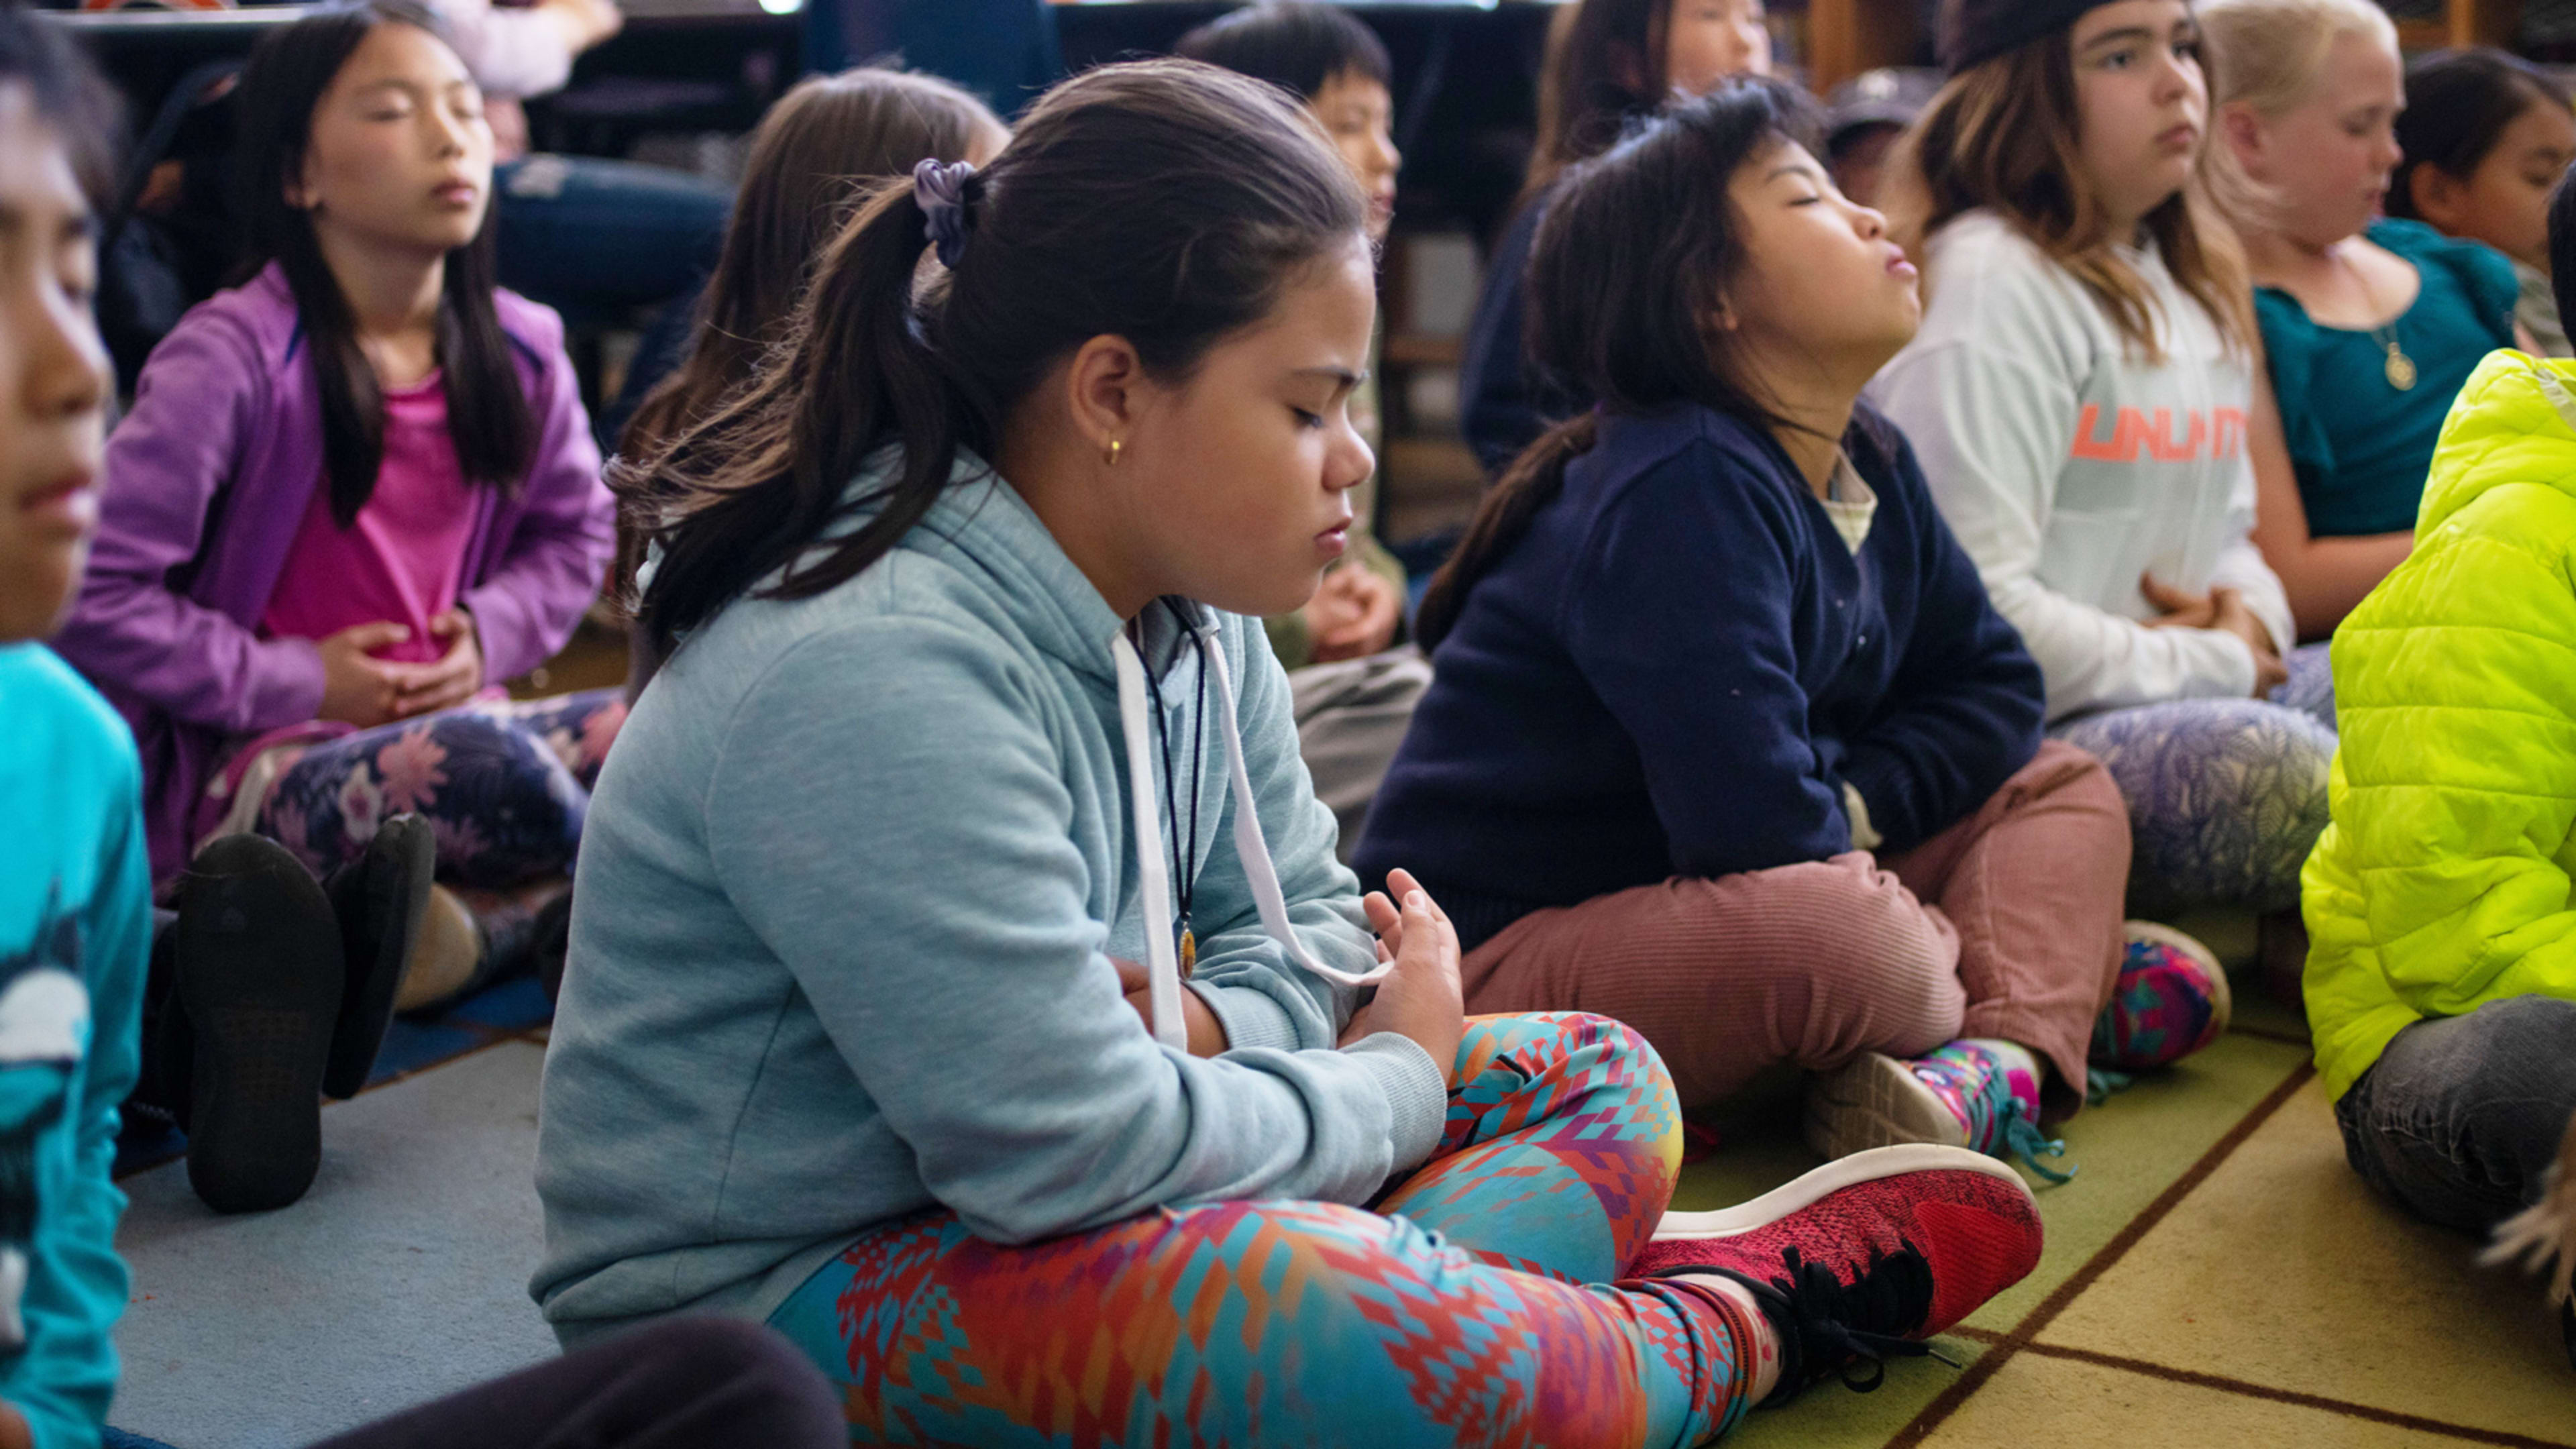 Can mindfulness training make young kids better students?